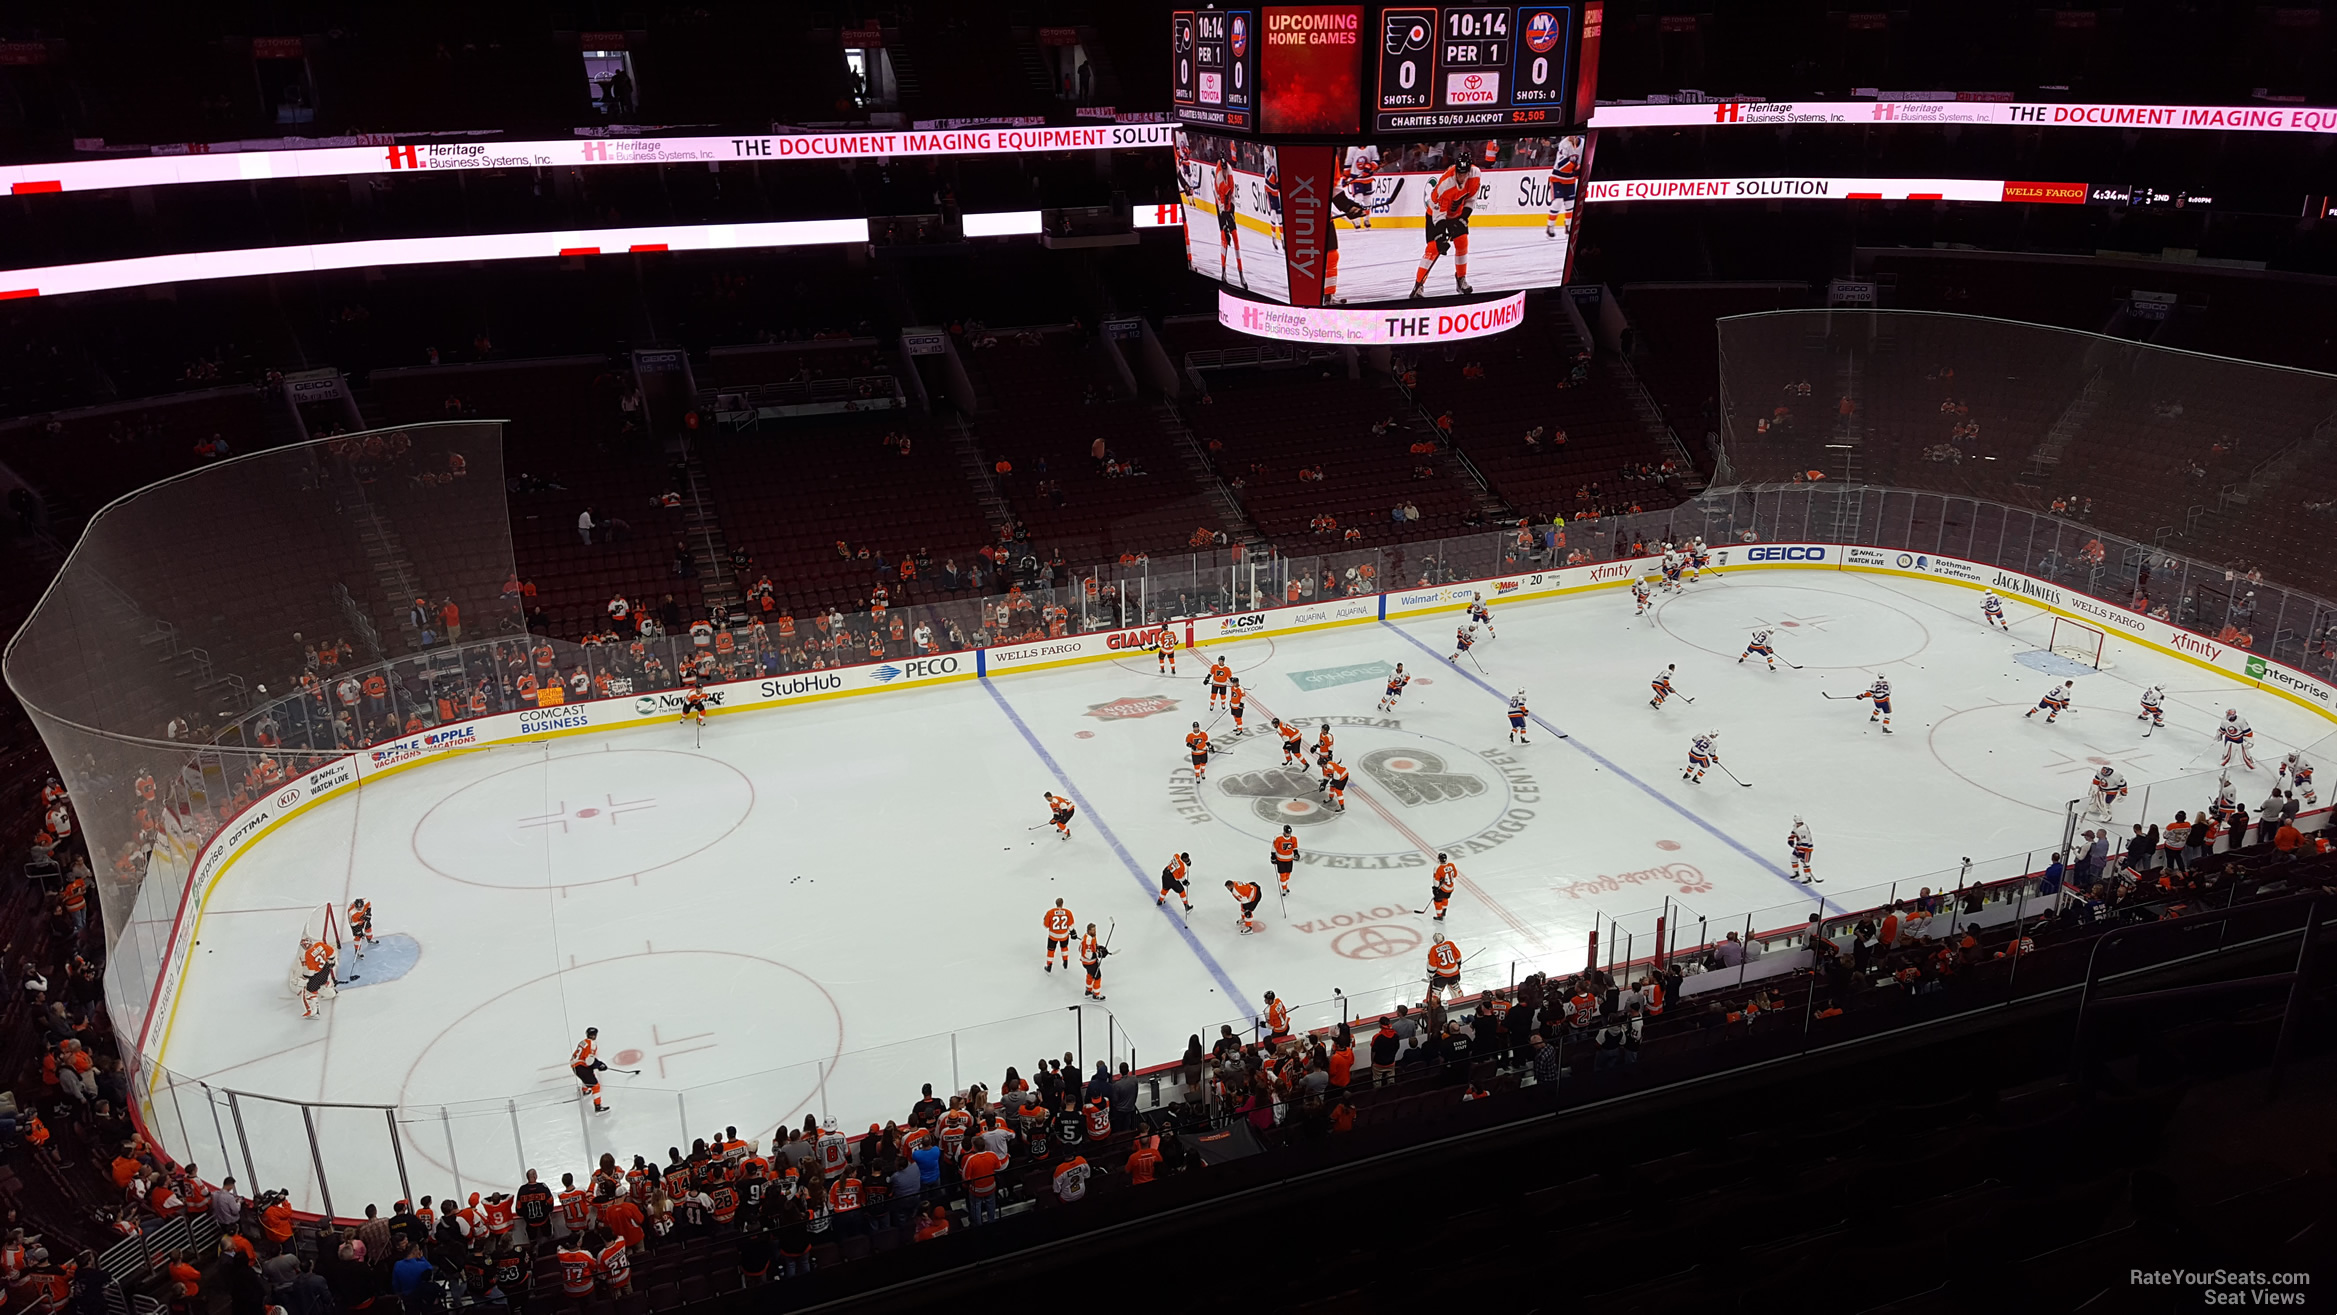 section 223, row 8 seat view  for hockey - wells fargo center